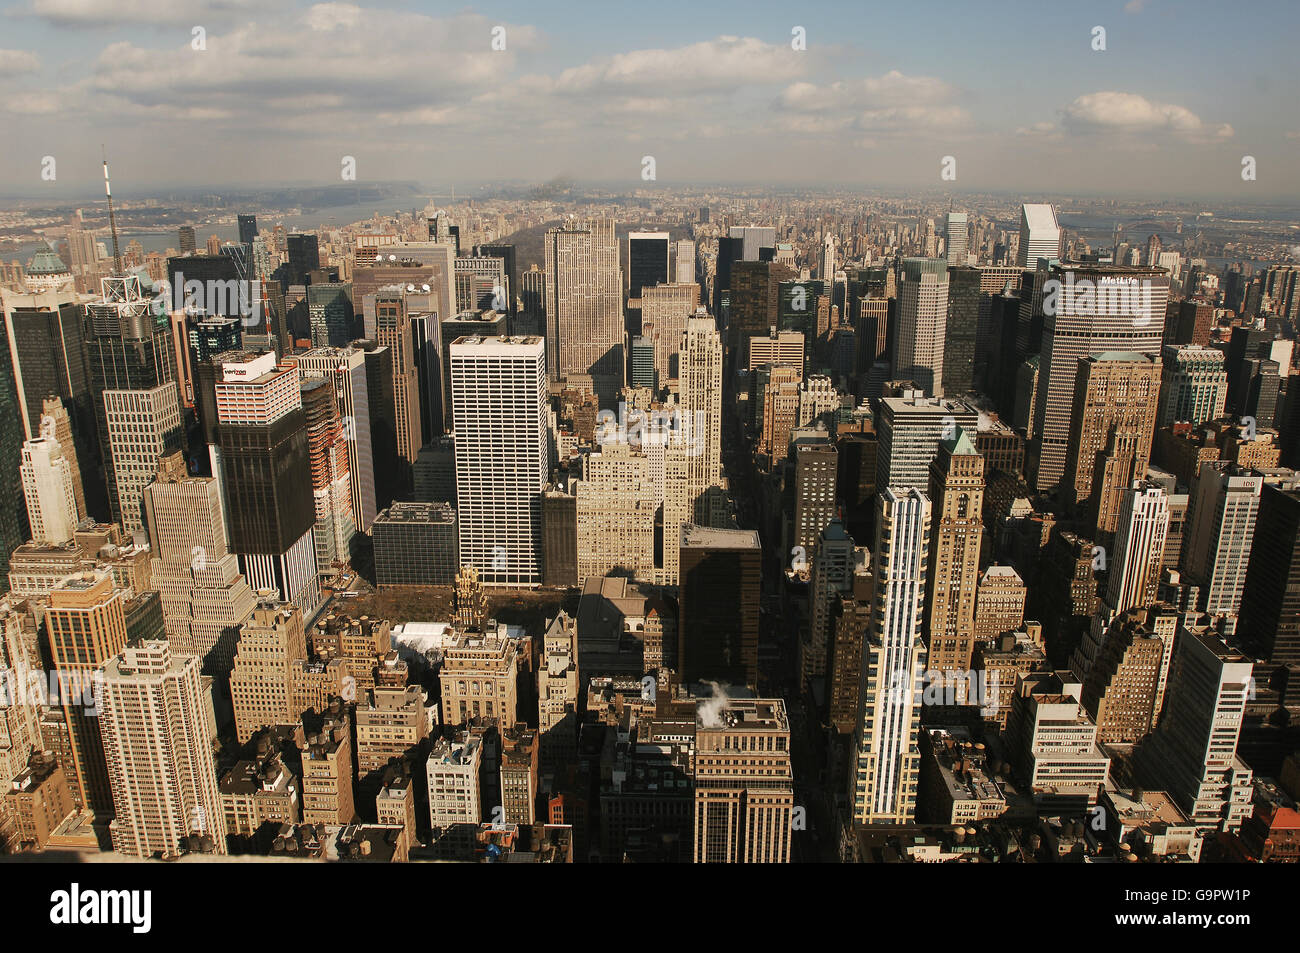 The view from the top of the Empire State building, towards midtown Manhattan New York City. Stock Photo